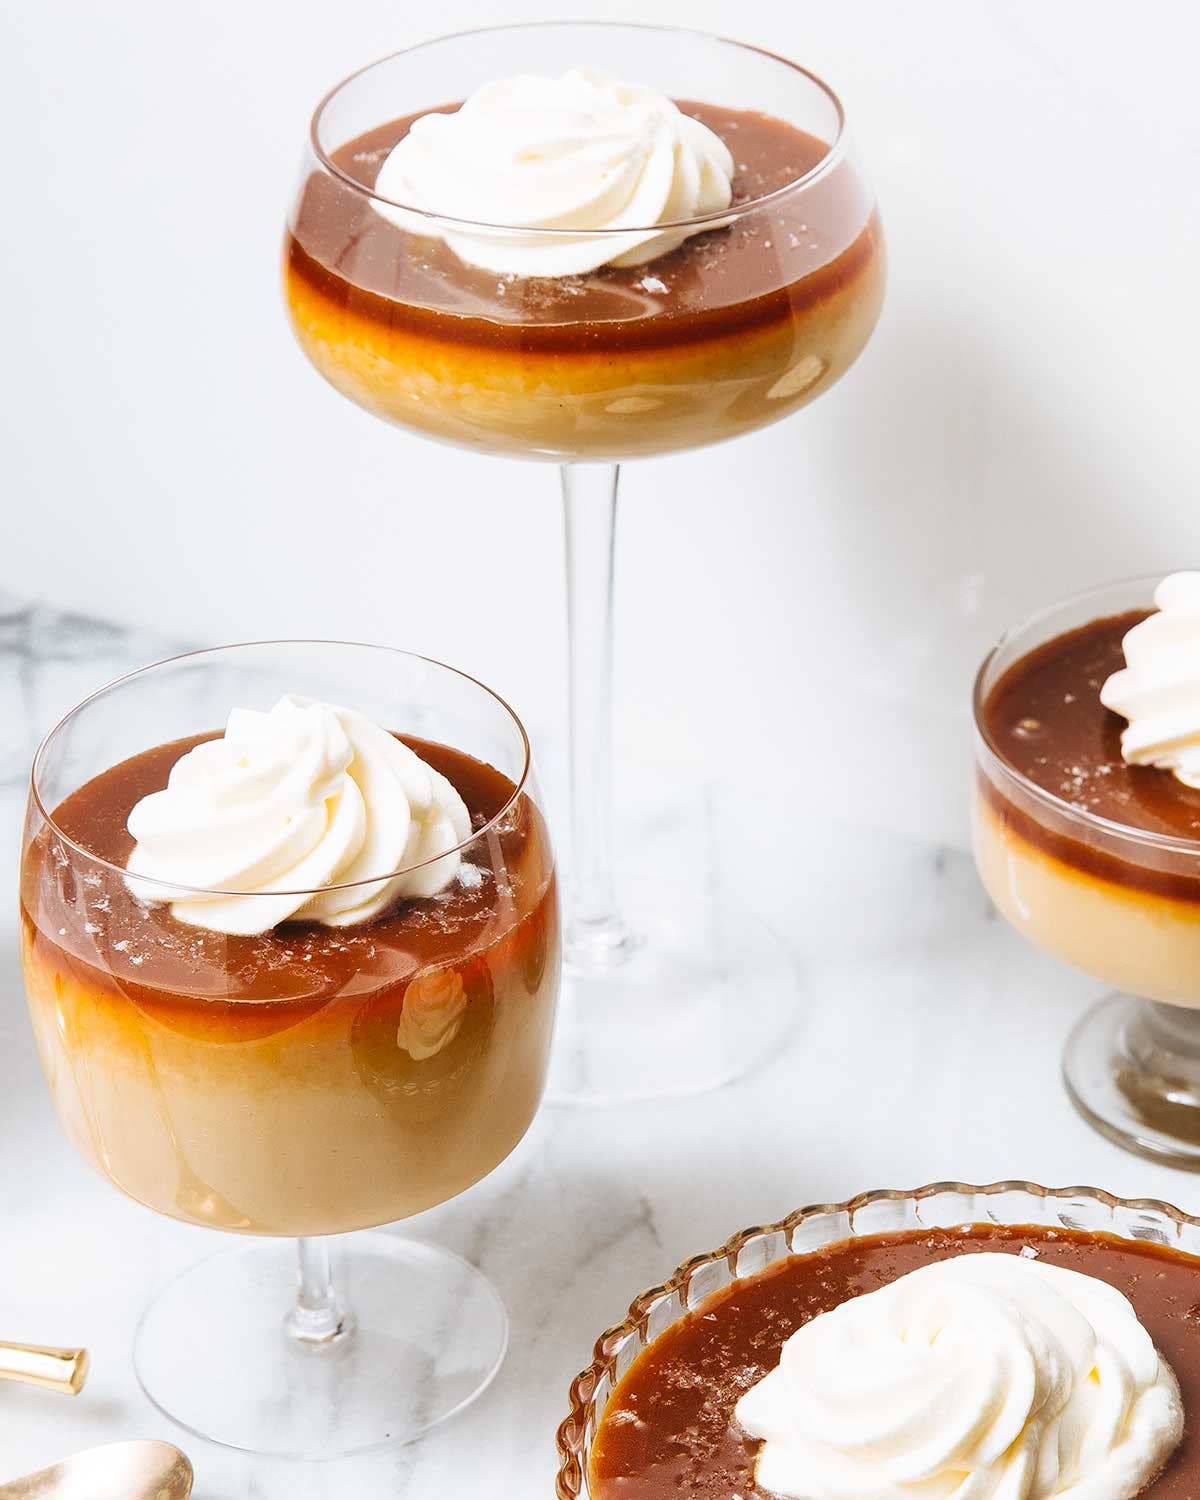 Clouds of Whipped Cream Elevate These Desserts